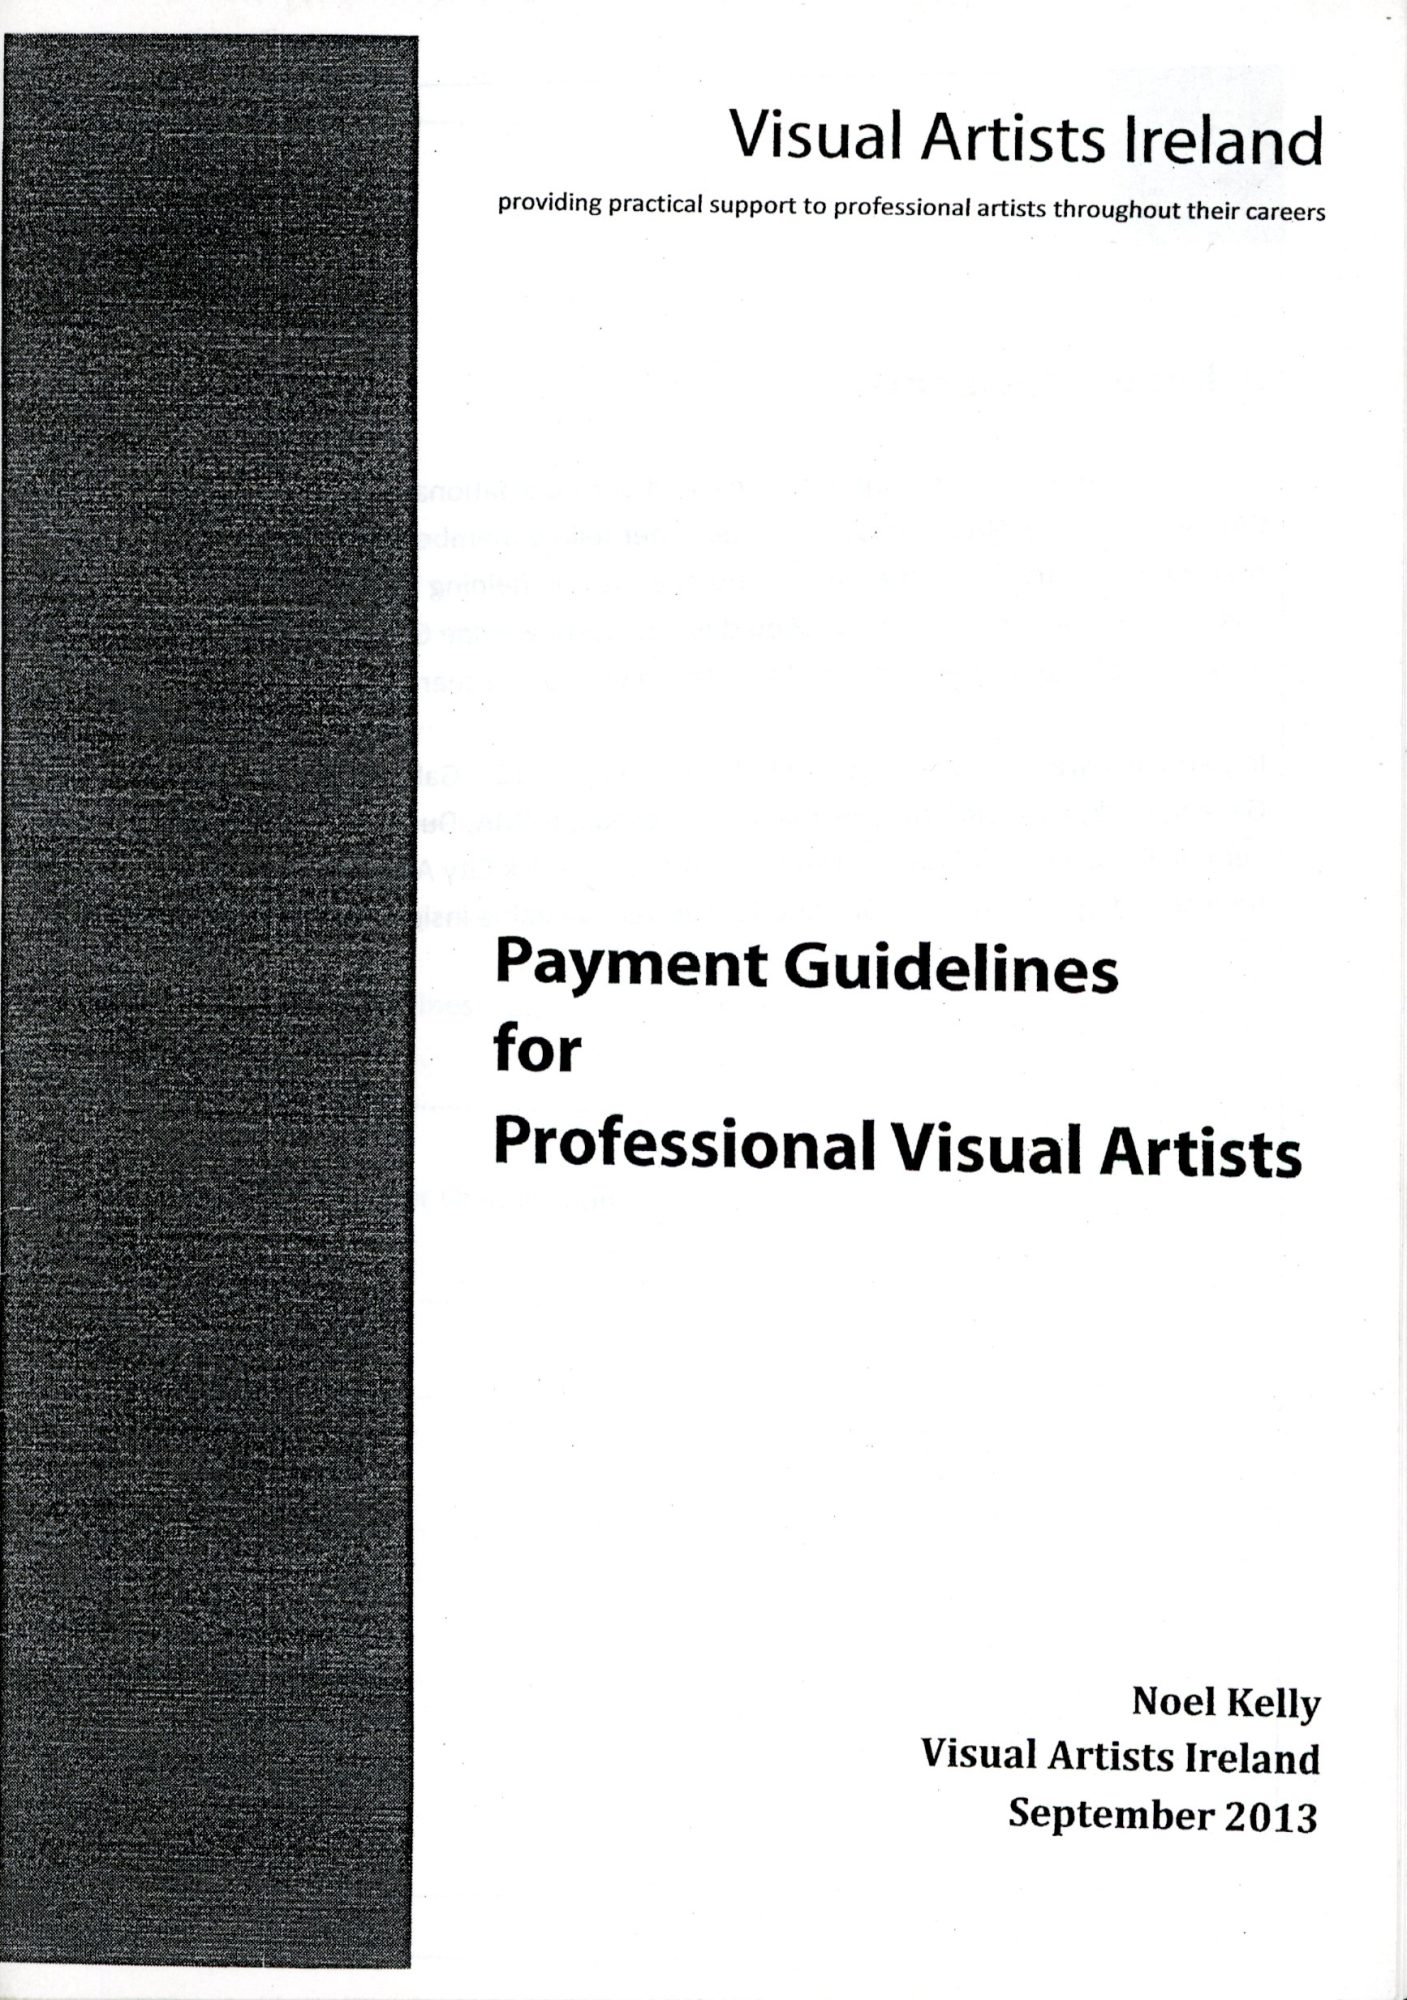 Payment Guidelines for Professional Visual Artists Noel Kelly